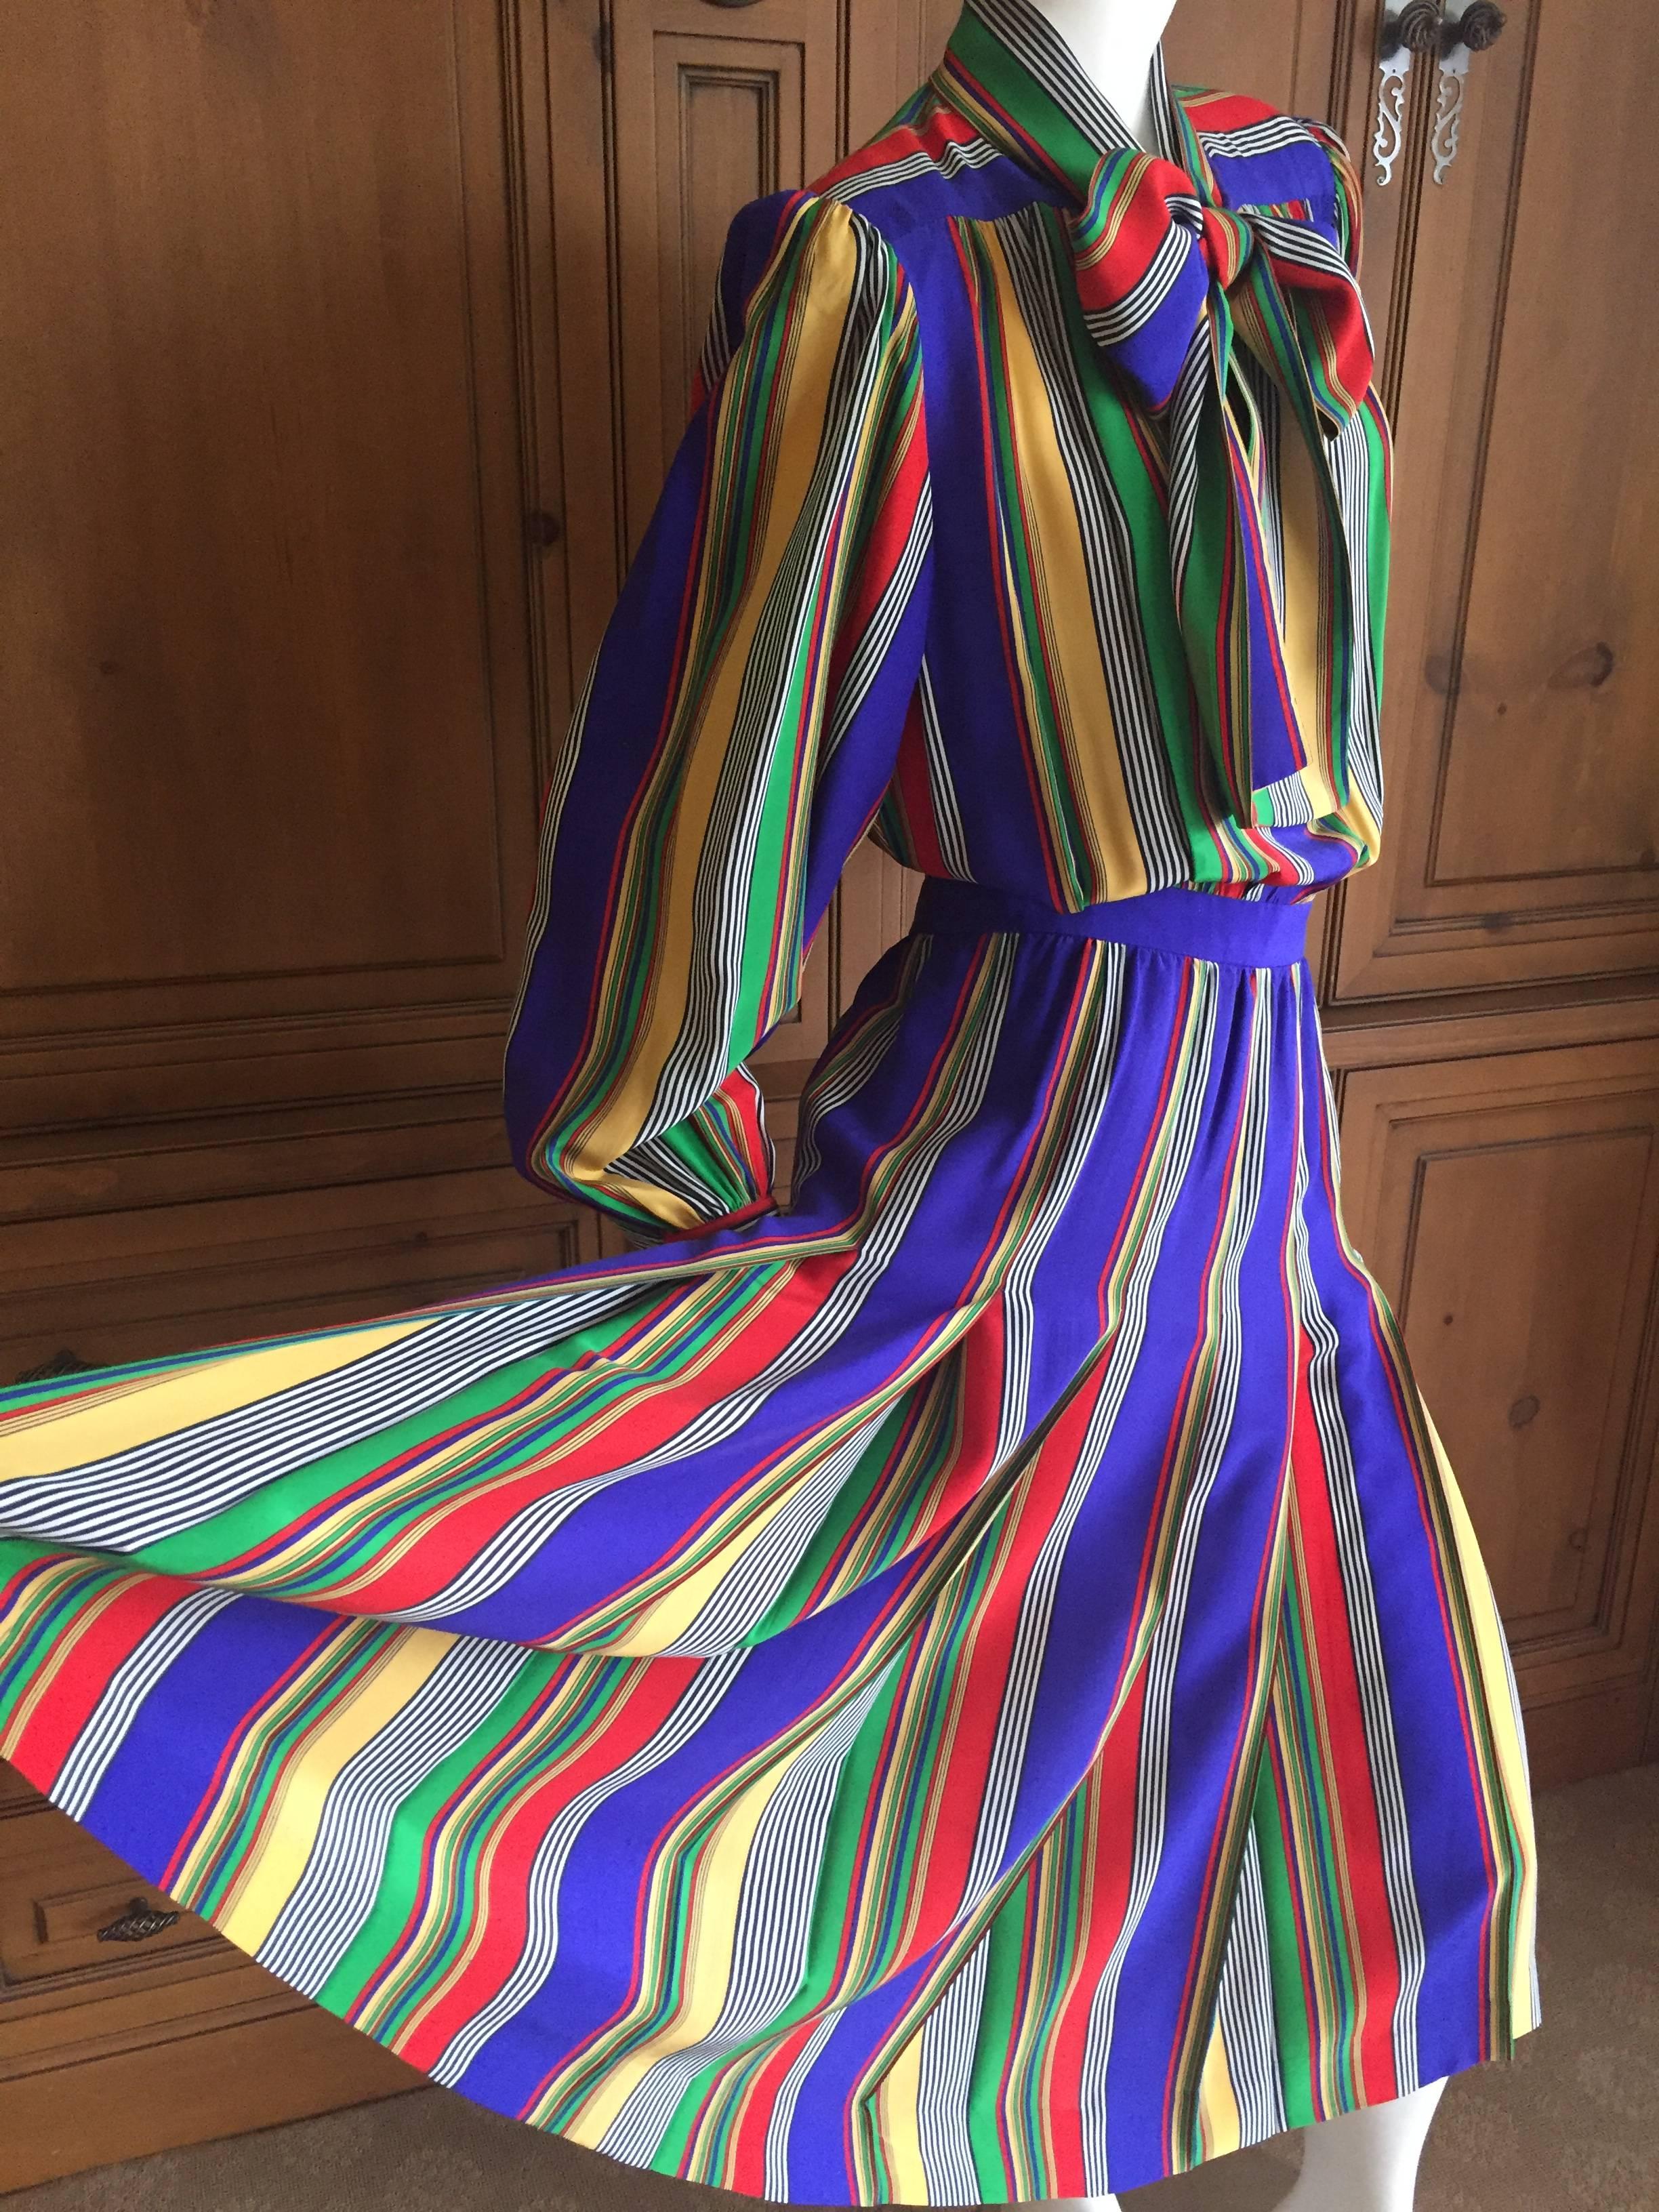 Yves Saint Laurent Rive Gauche 1970's Stripe Silk Day Dress with Bow For Sale 4